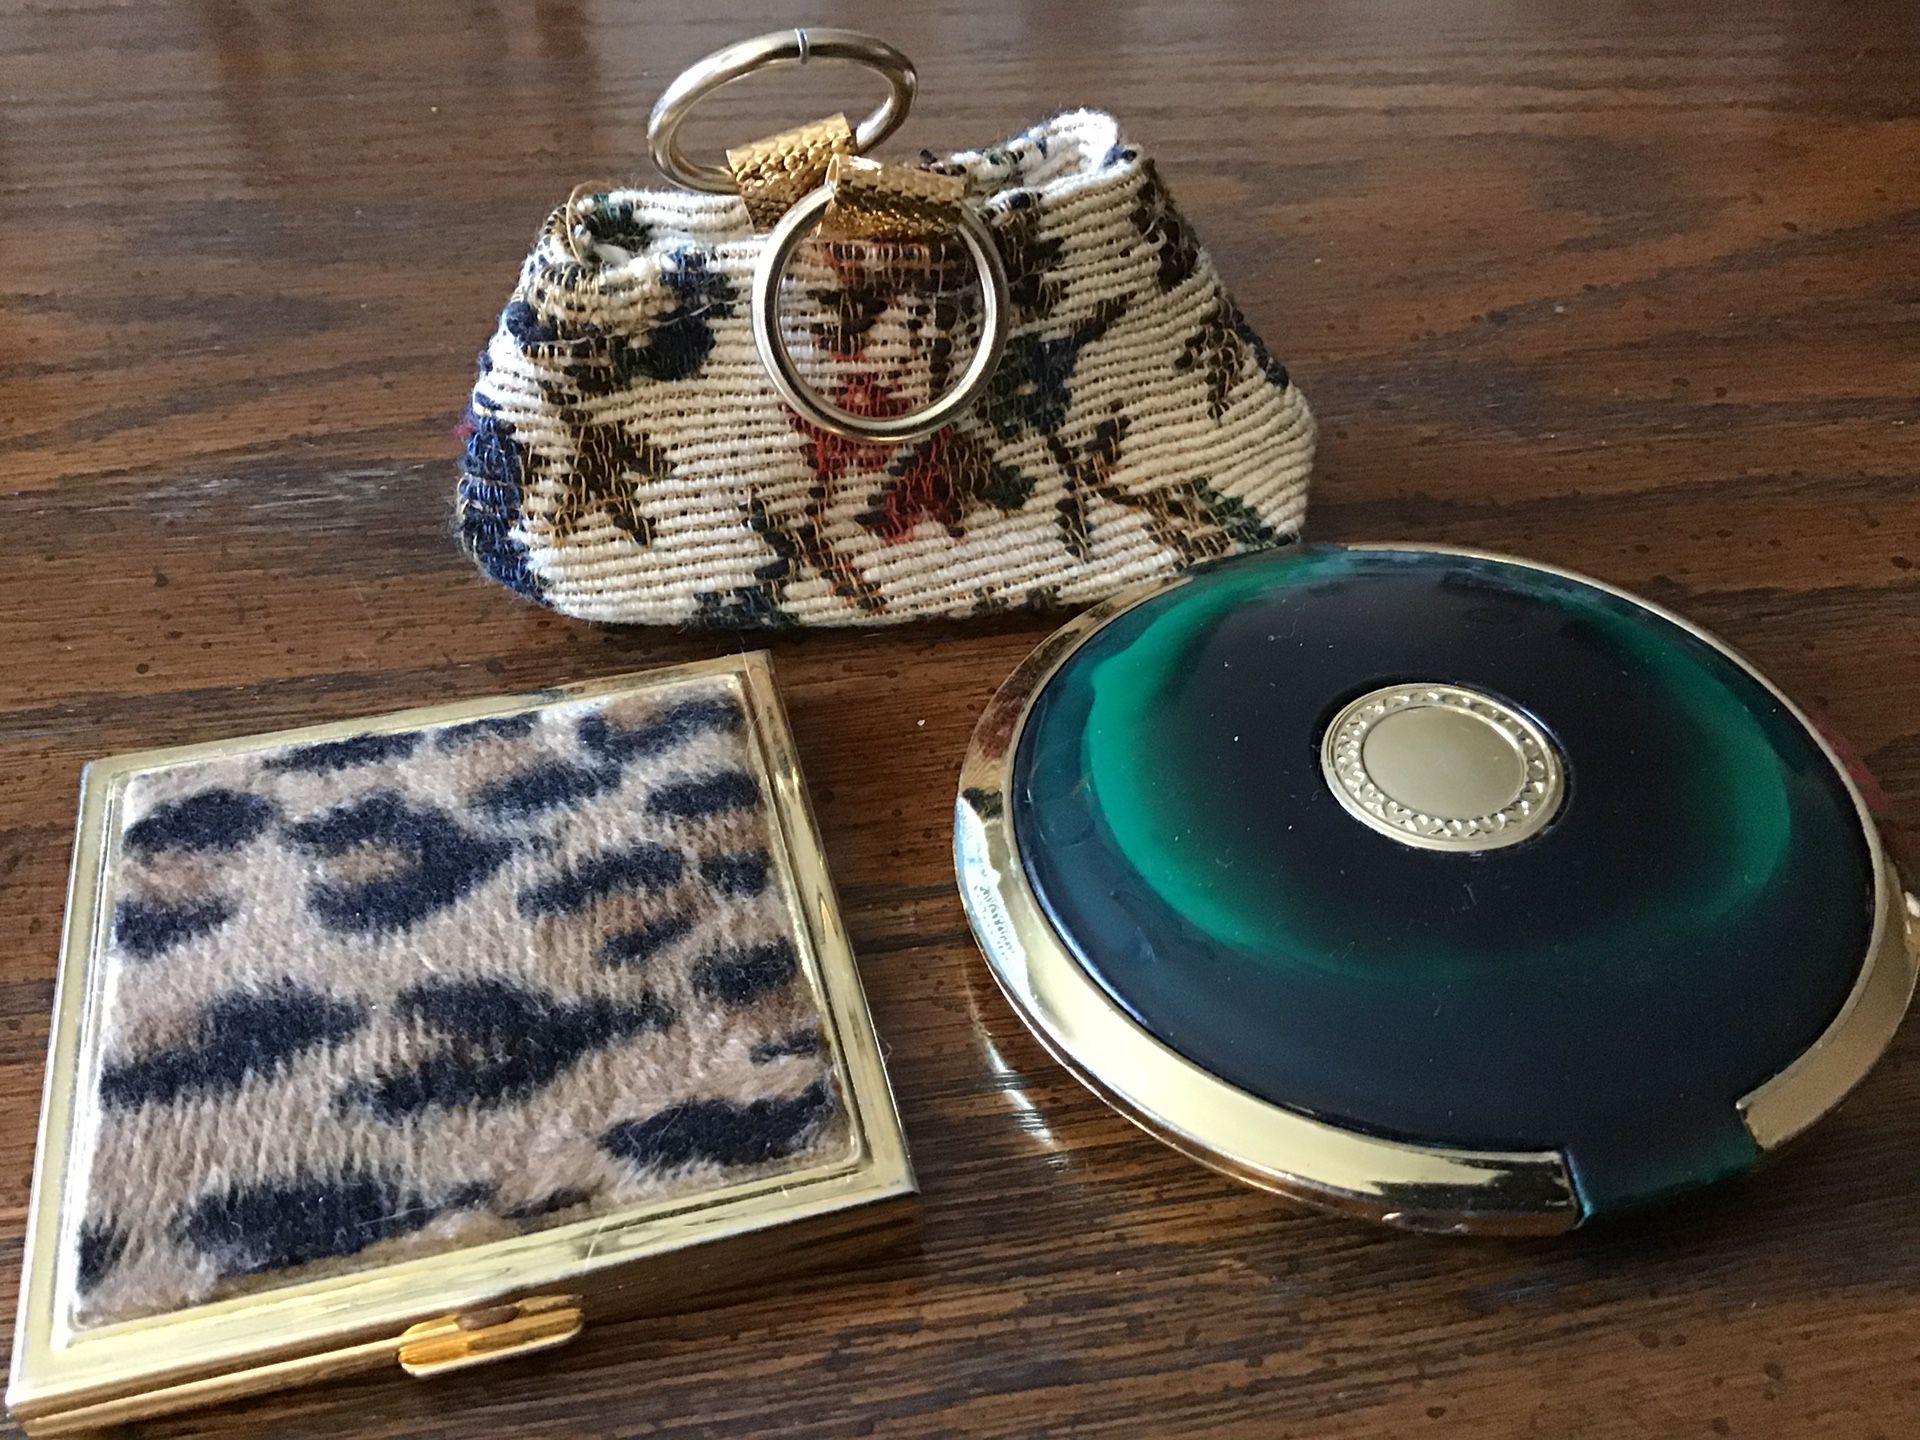 Vintage compact mirrors